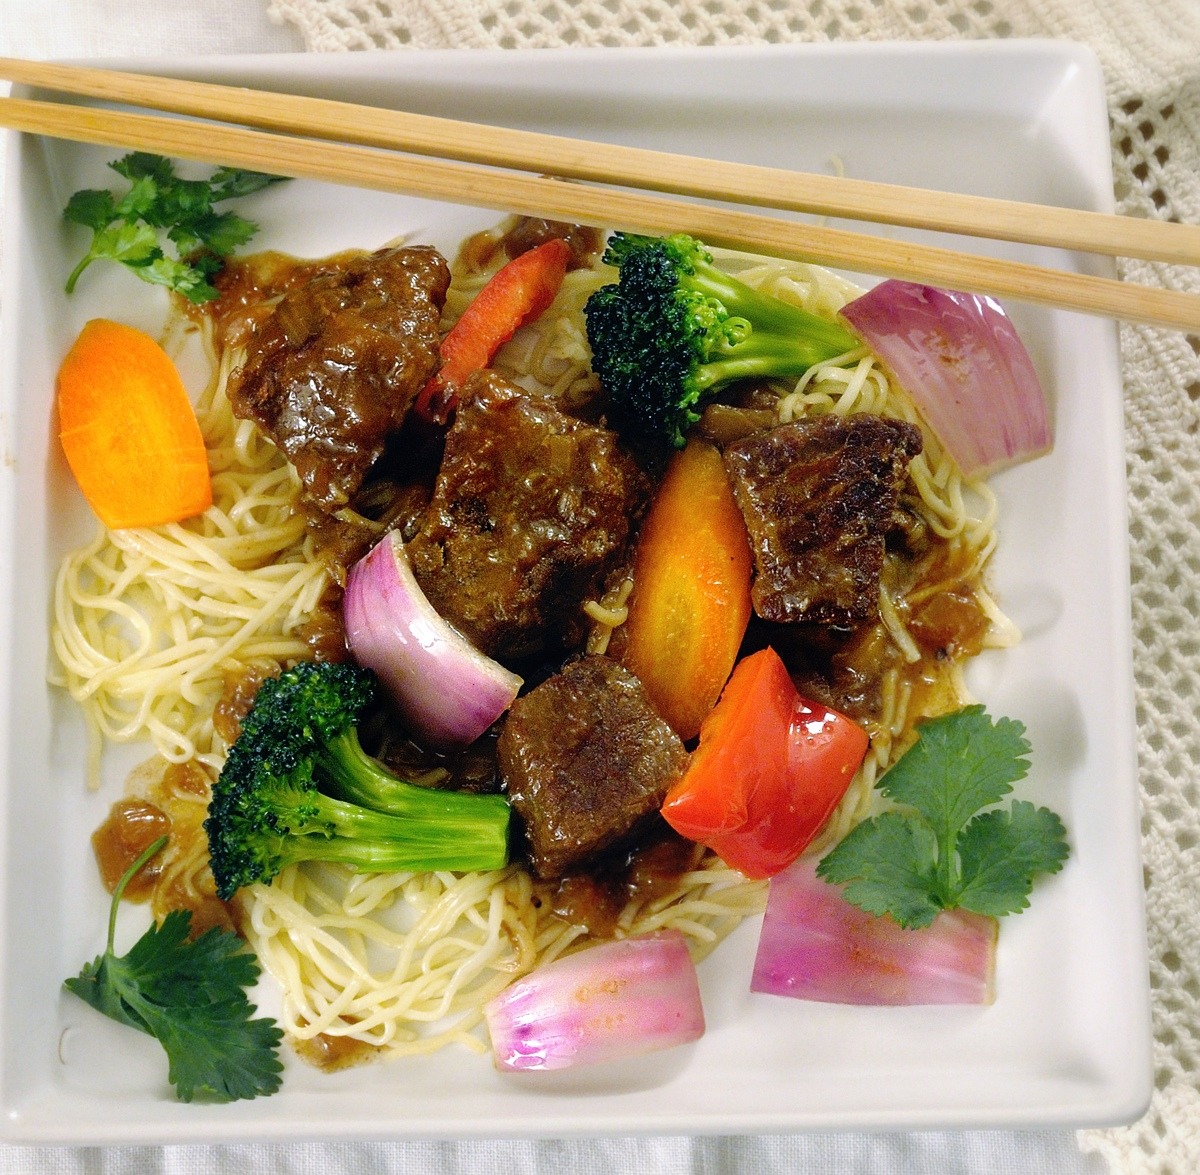 Braised Beef with Star Anise, Chinese Noodles & Stir Fry Vegetables, Square White Plate, Chopsticks